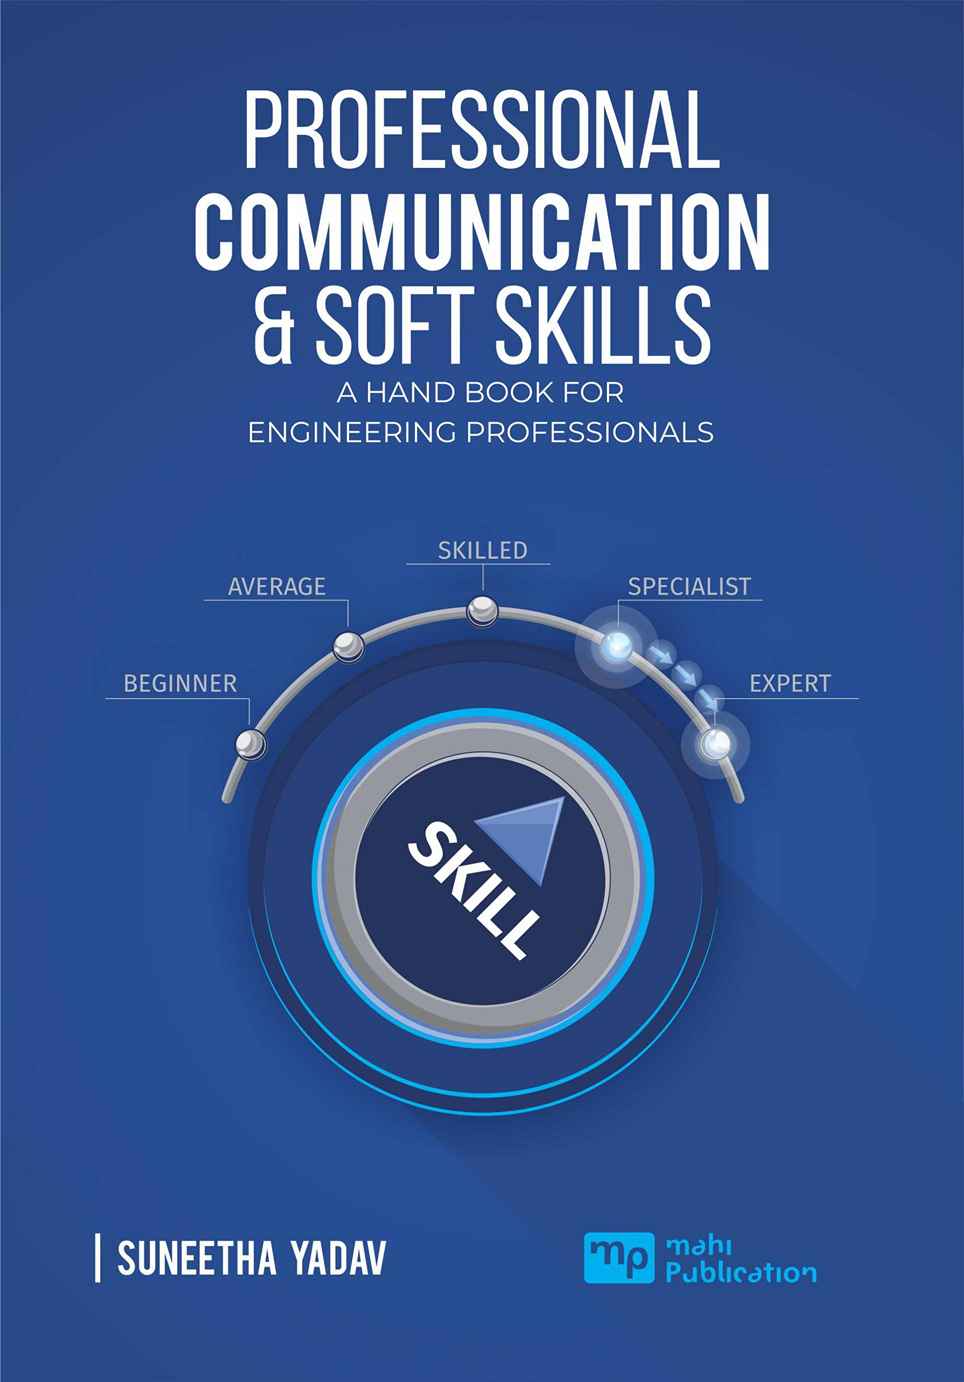 Professional Communication & Soft Skills A Hand Book for Engineering Professionals